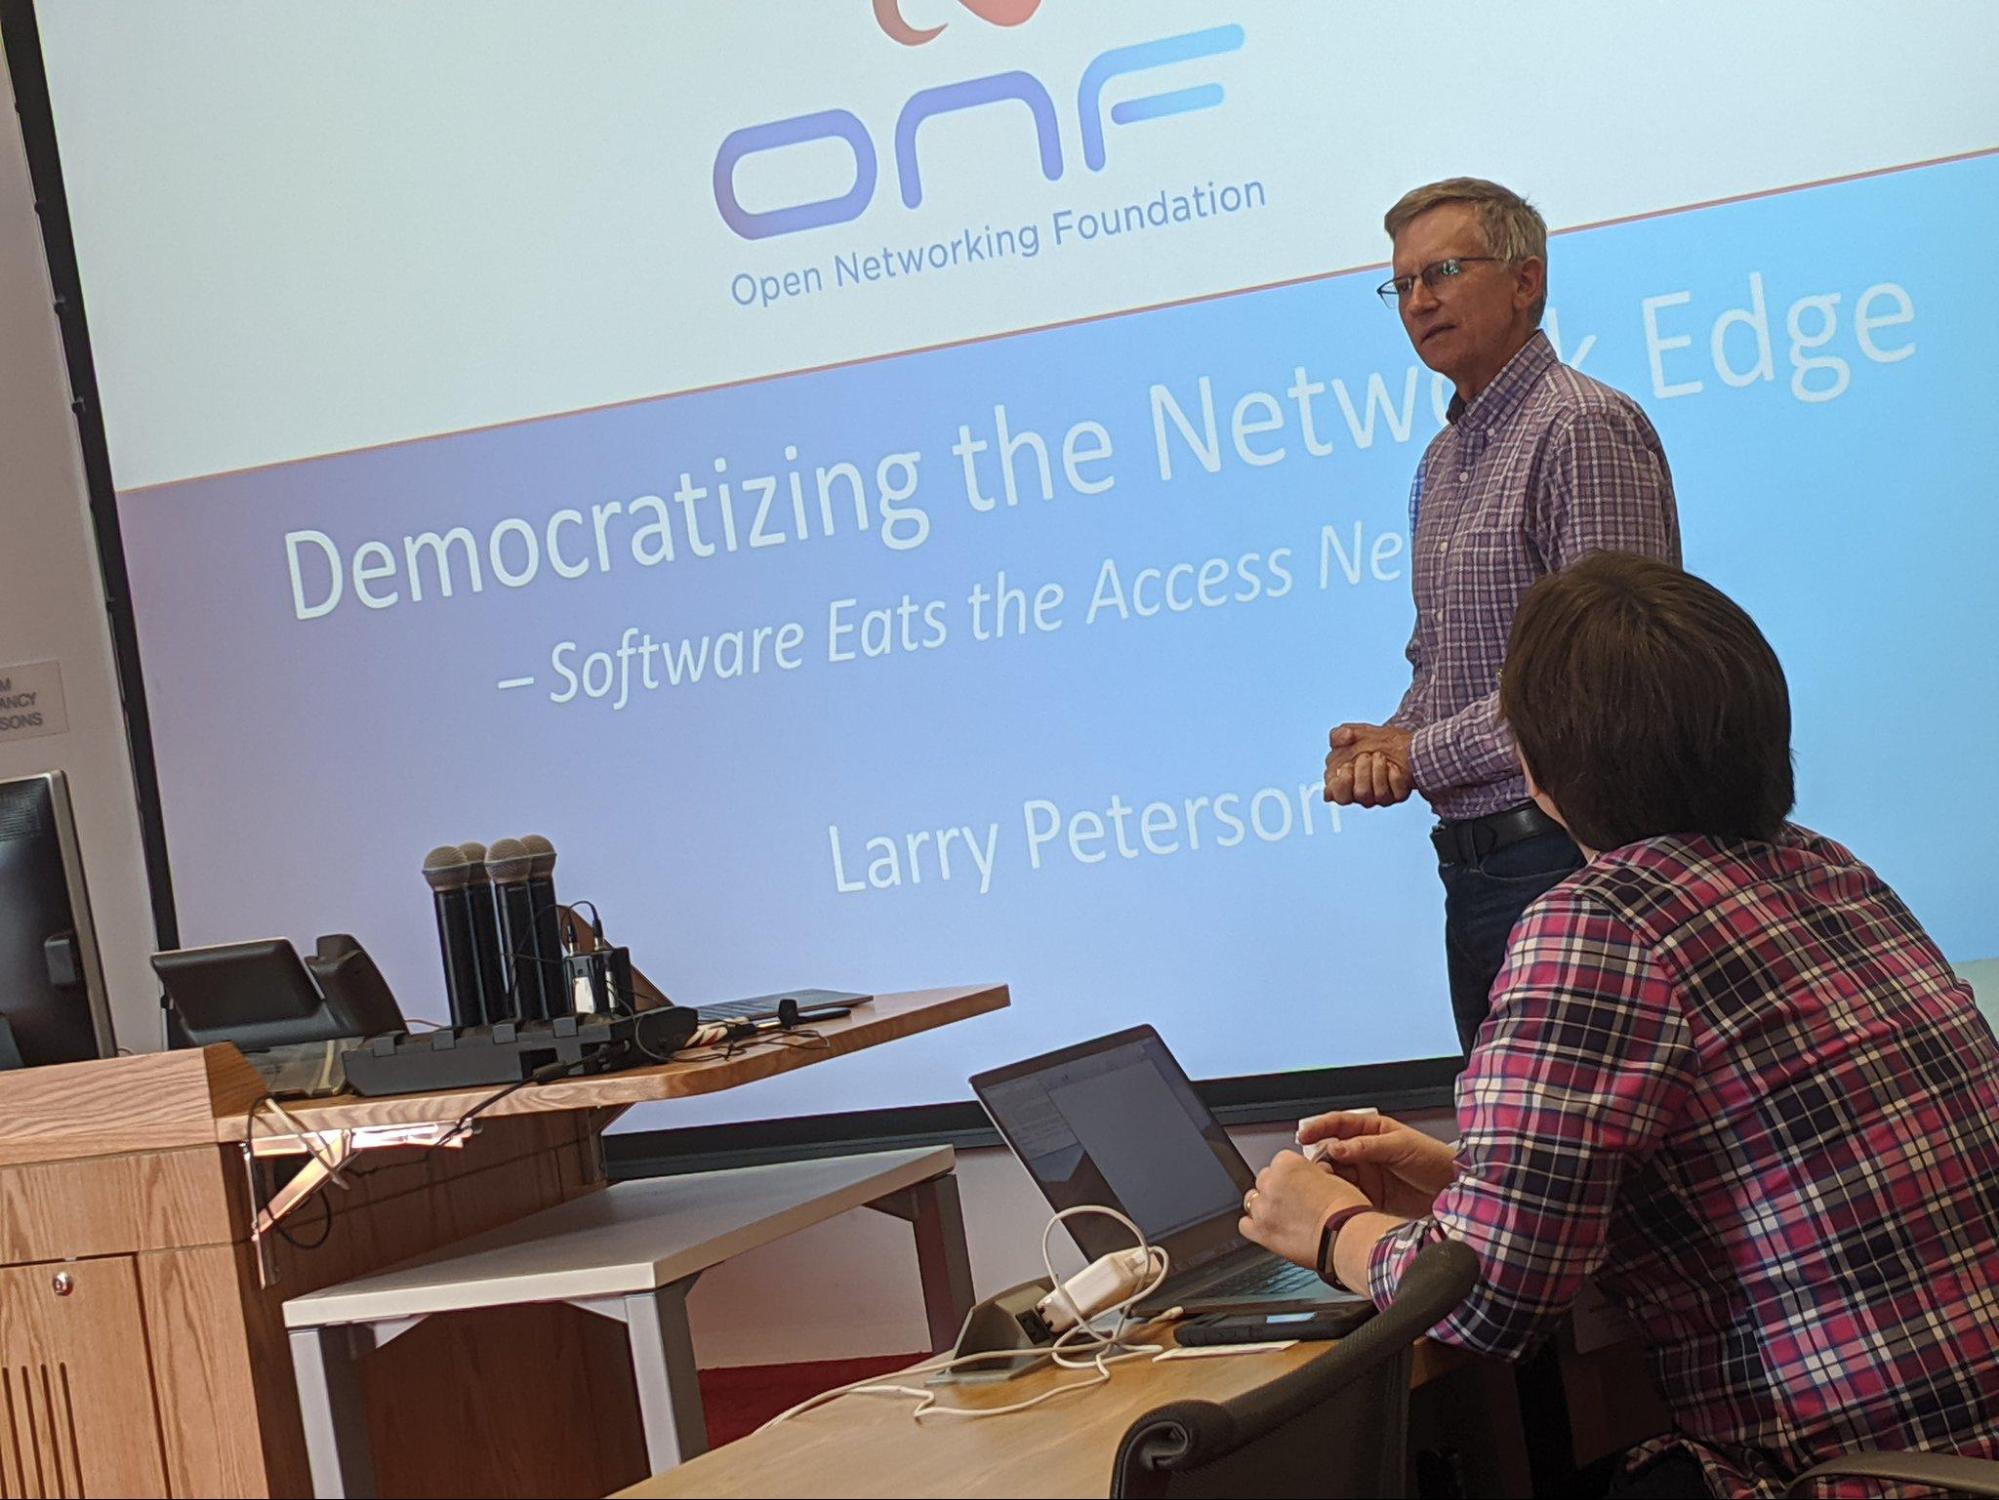 Larry Peterson, CTO of the Open Networking Foundation, presents the keynote 'Democratizing the Network Edge' at the NPI Fall Retreat.